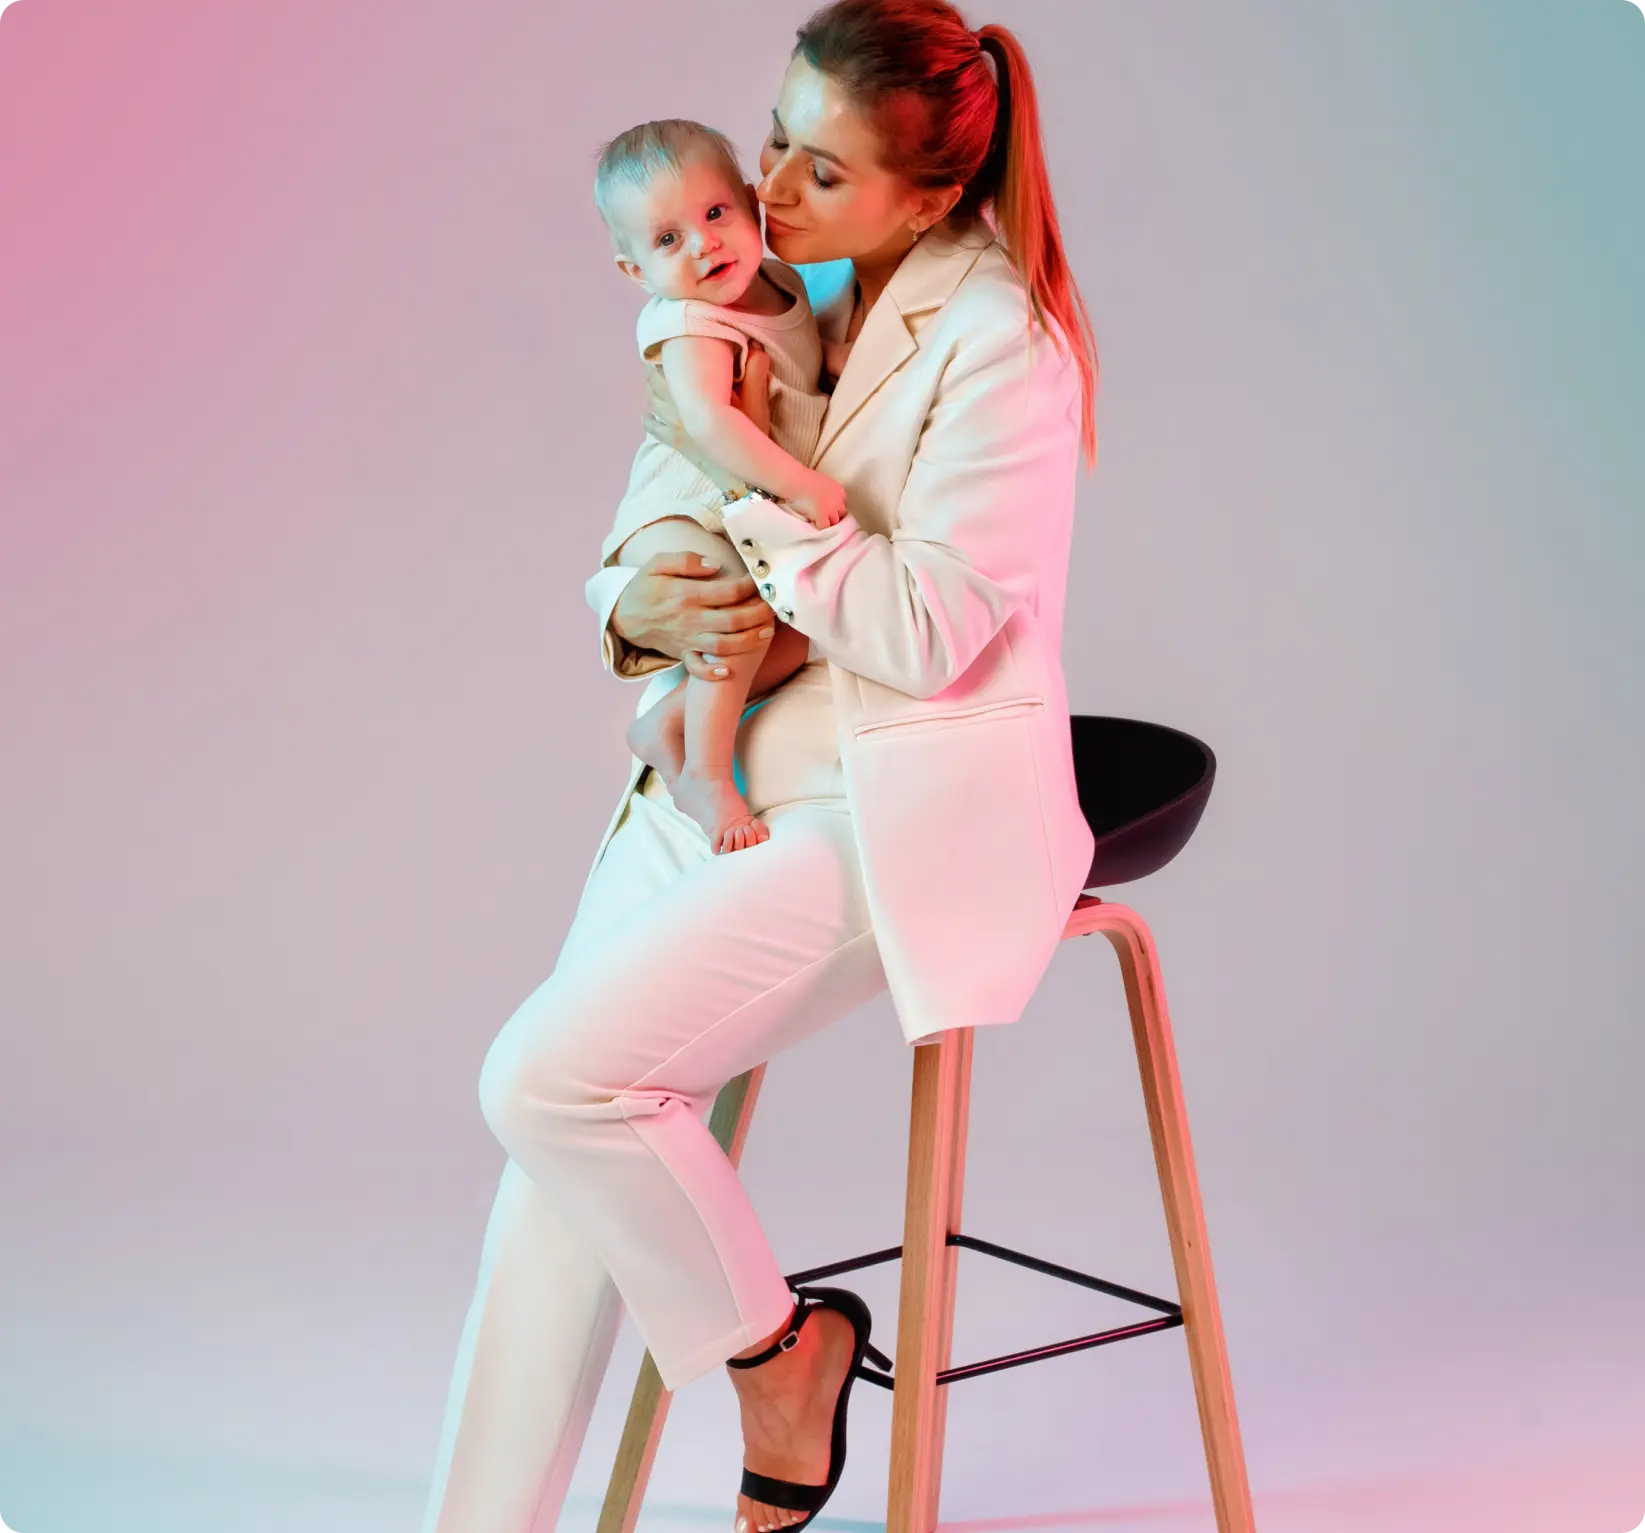 Caucasian woman wearing a white suit with her hair in a ponytail holding her baby sitting on a stool